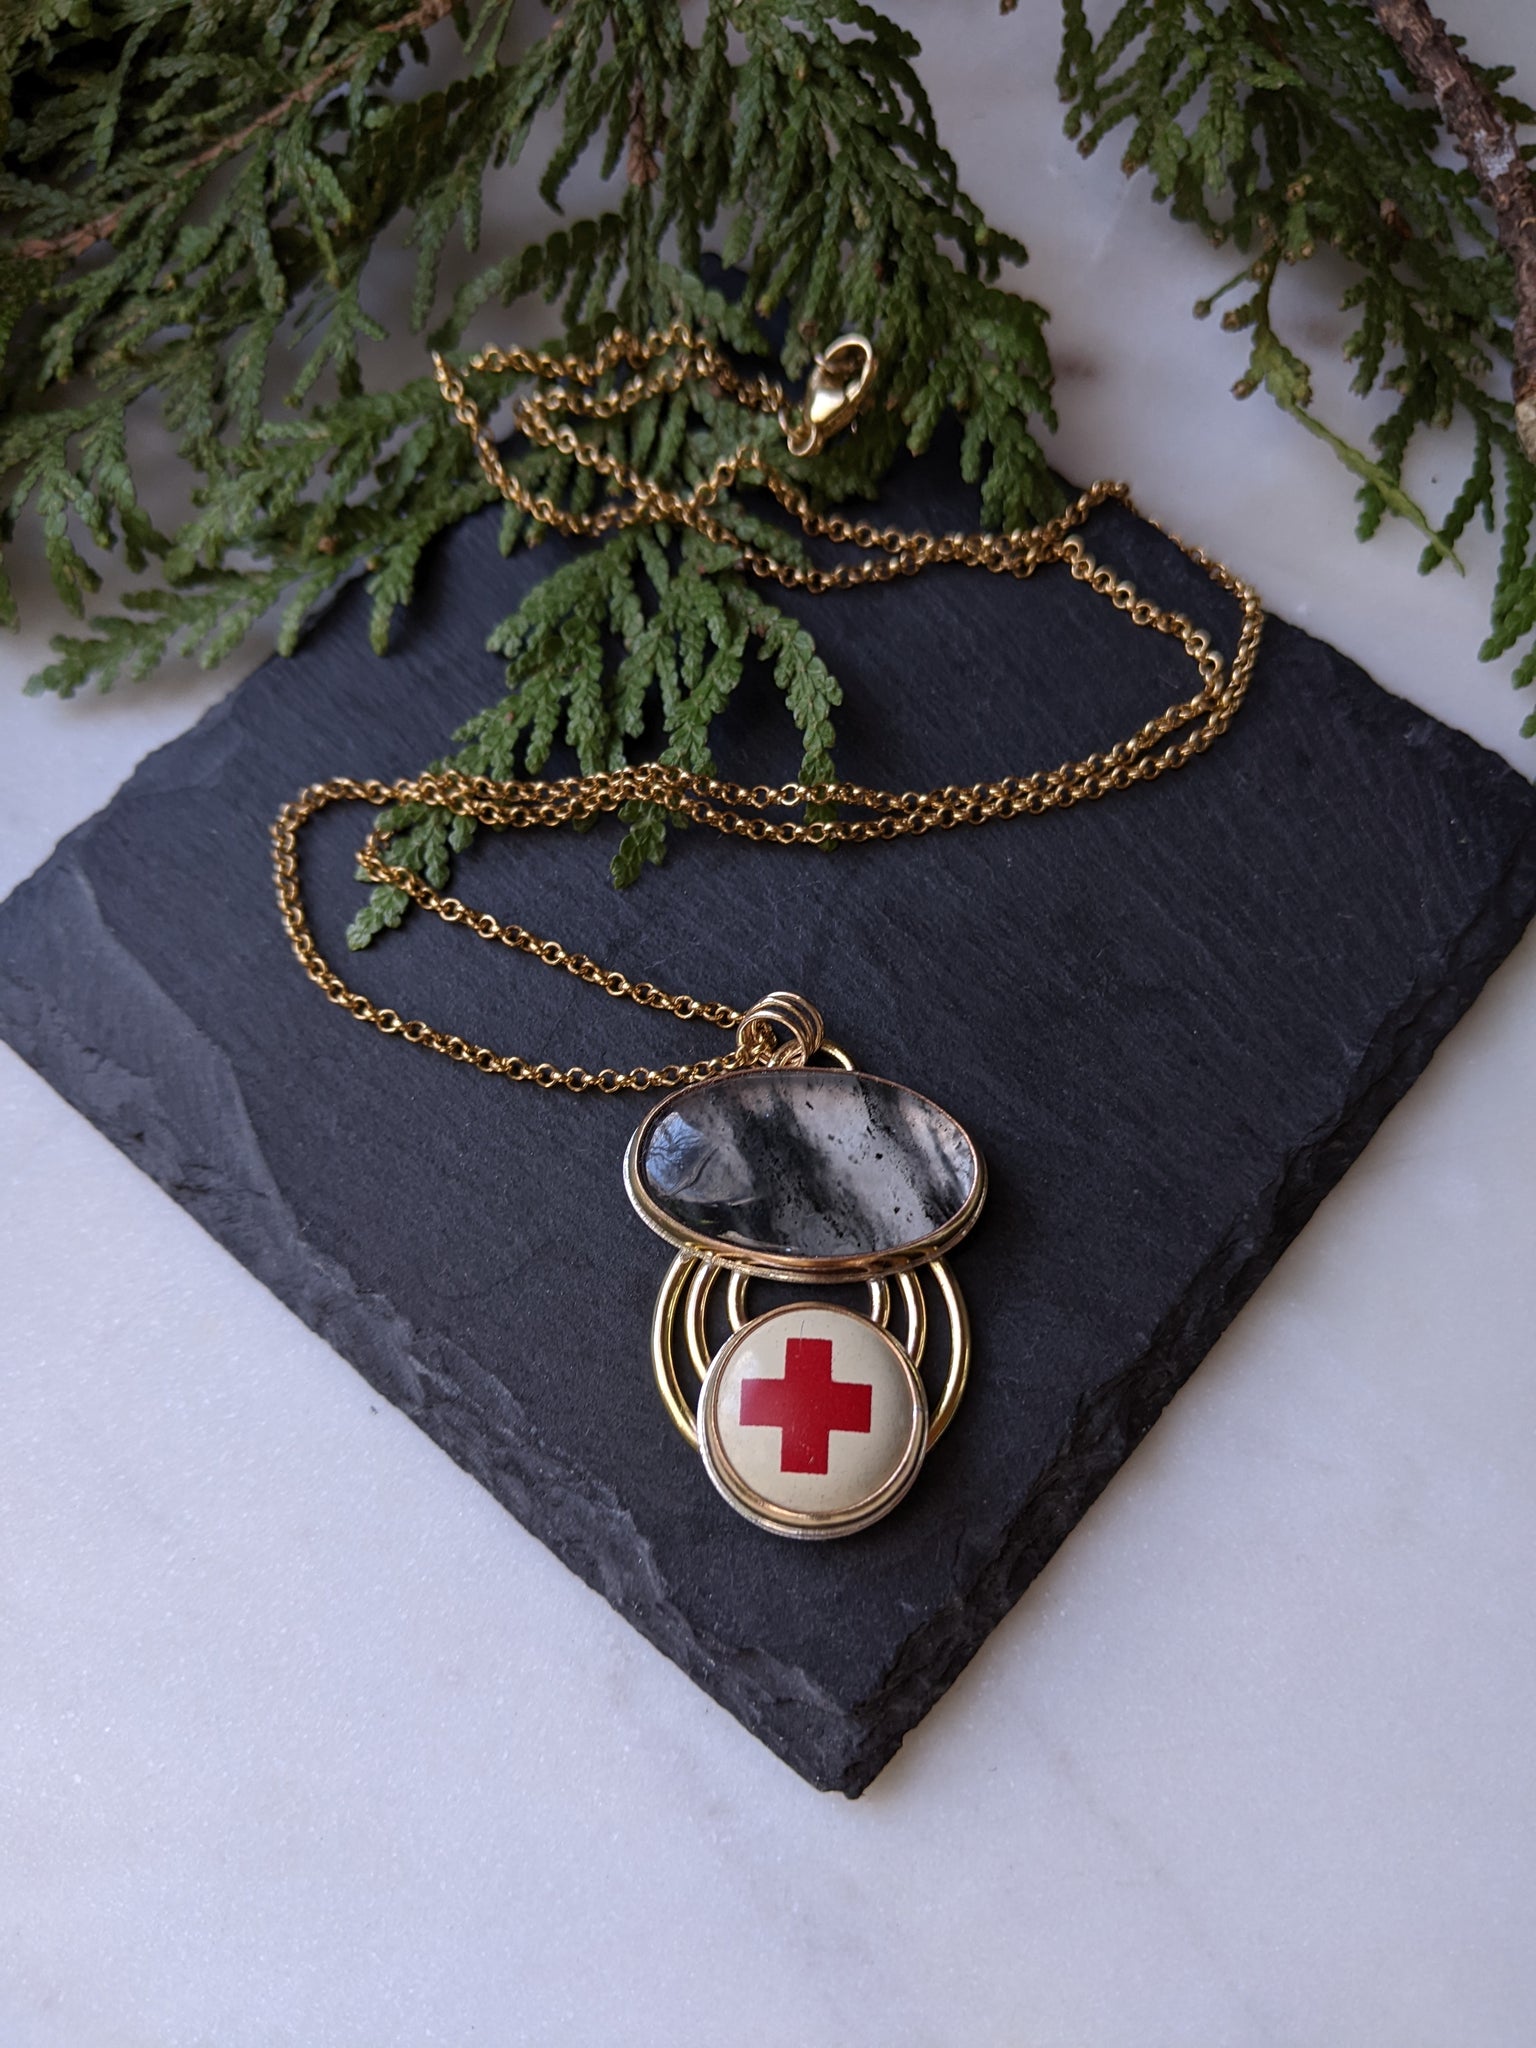 Crucifix Red Cross Necklace for Men Knights Templar Crusader Pendant  Necklace | eBay